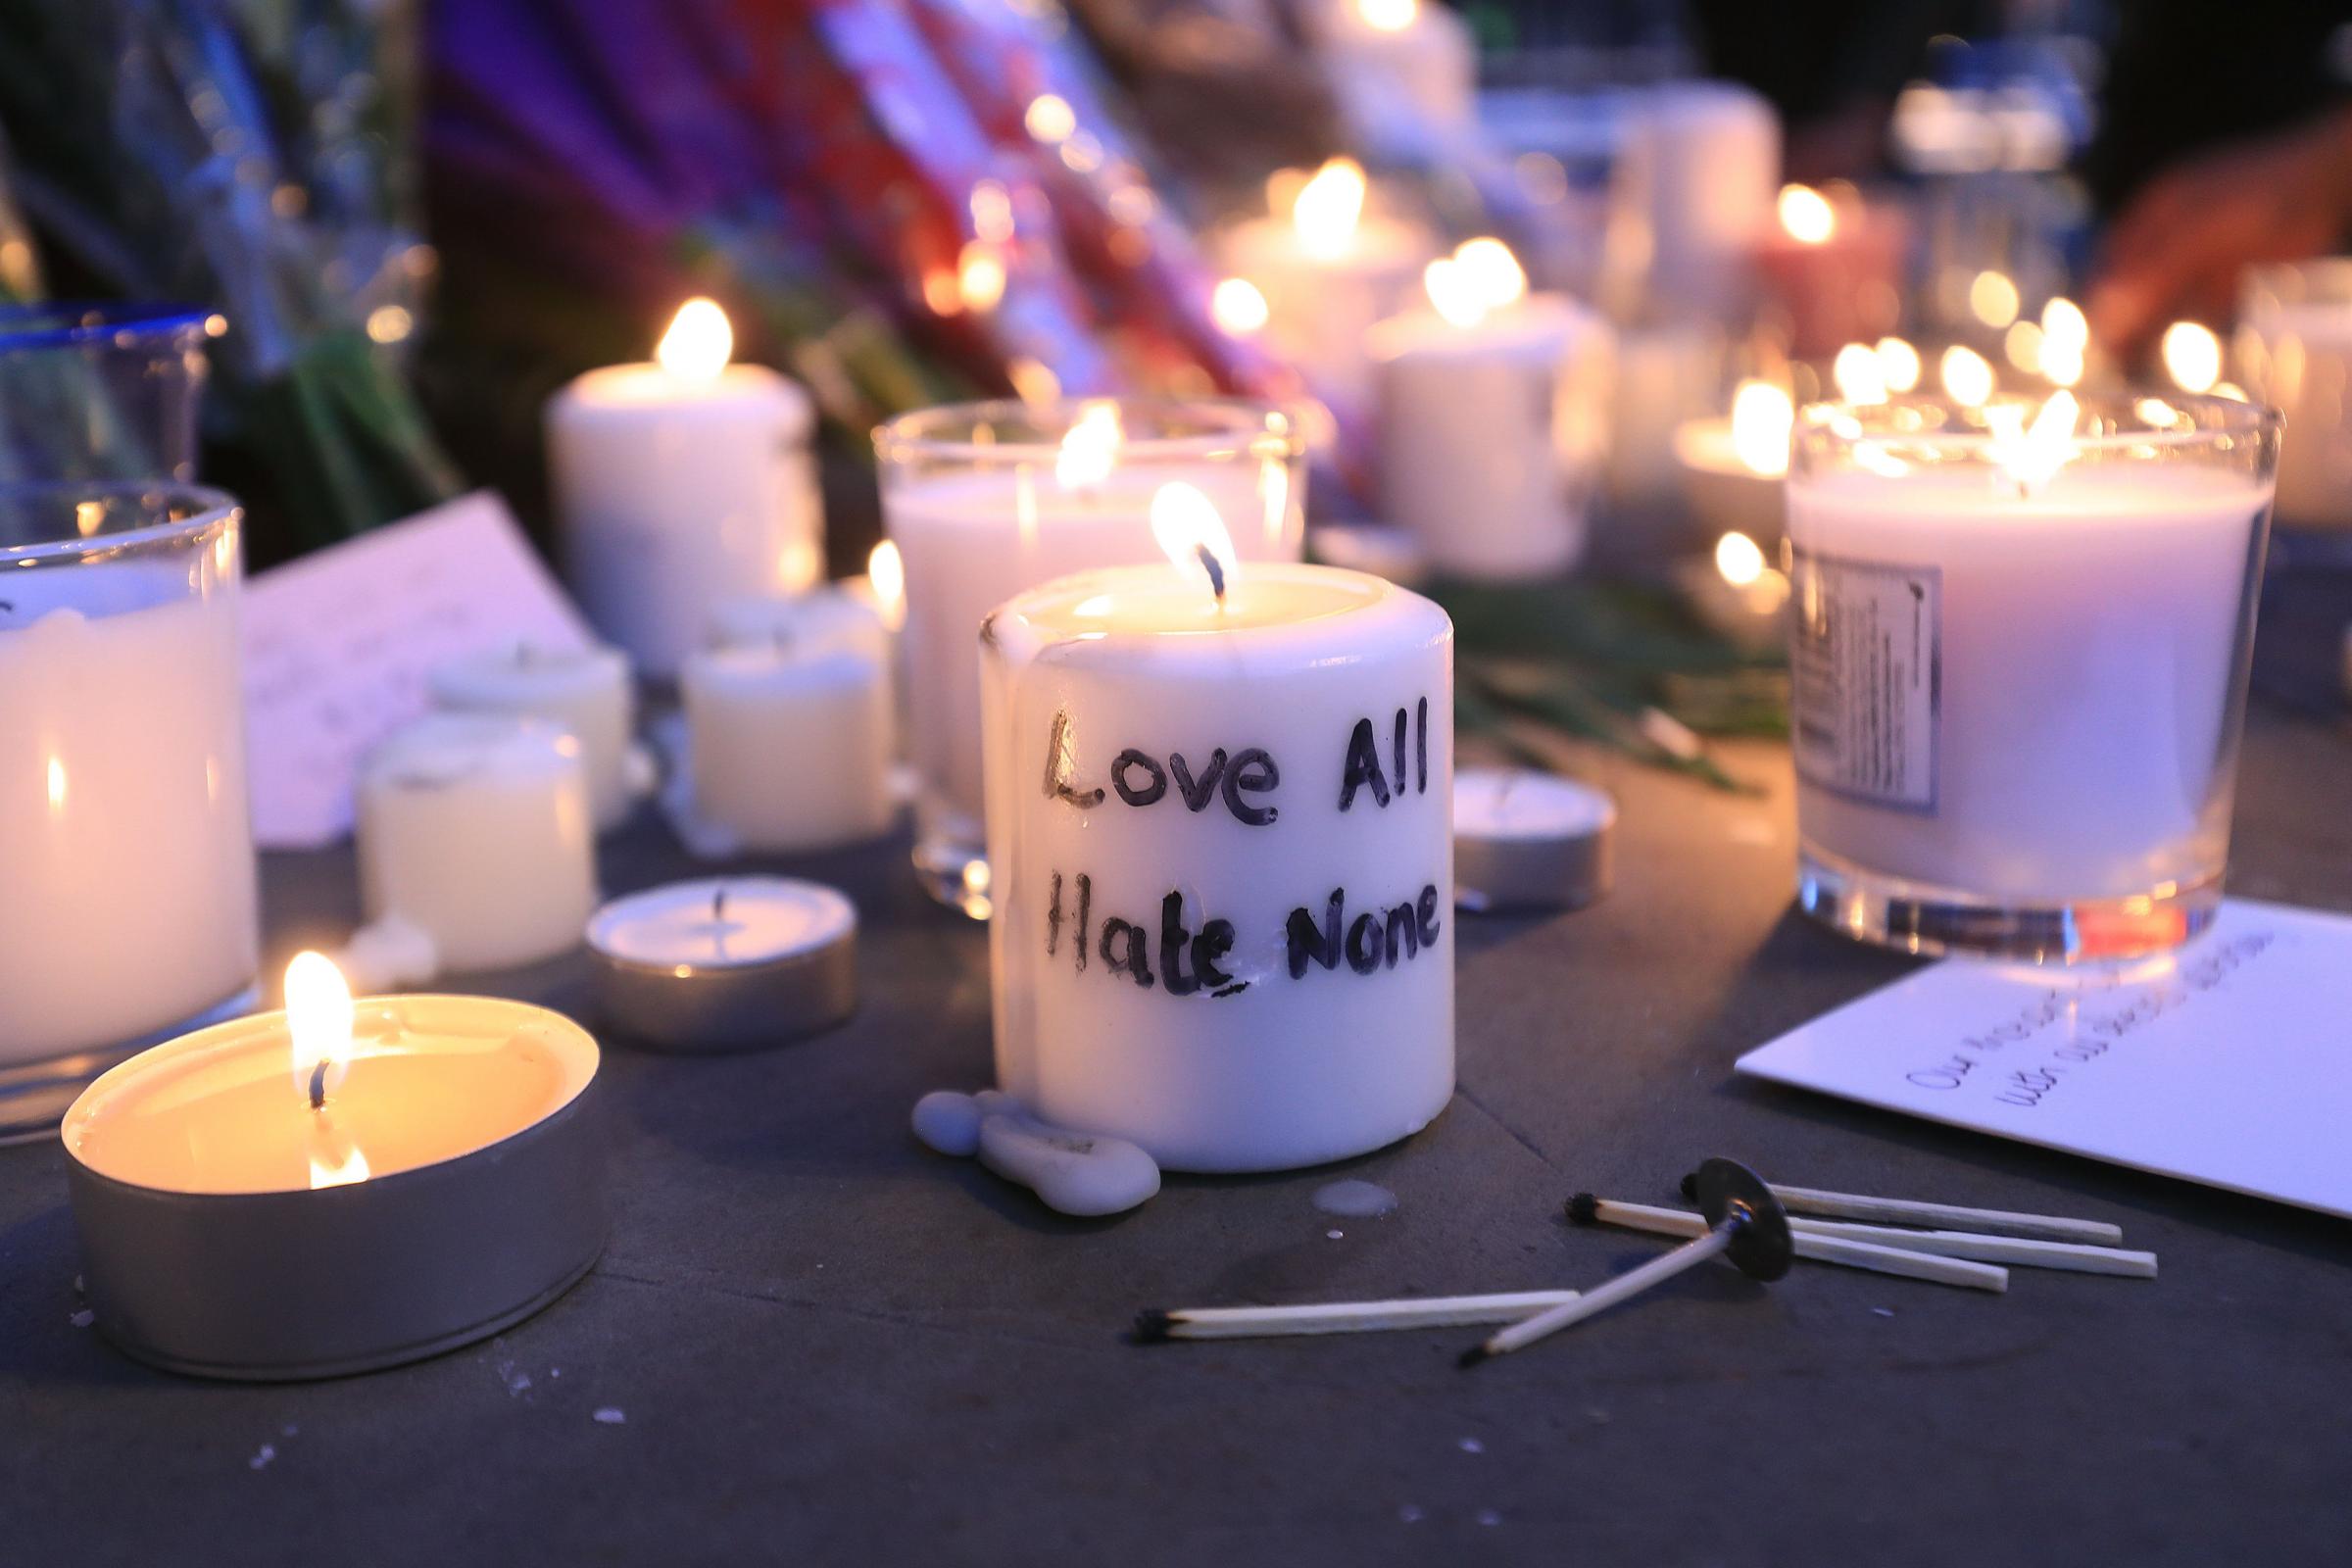 Vigil for Manchester victims to be held in Brighton